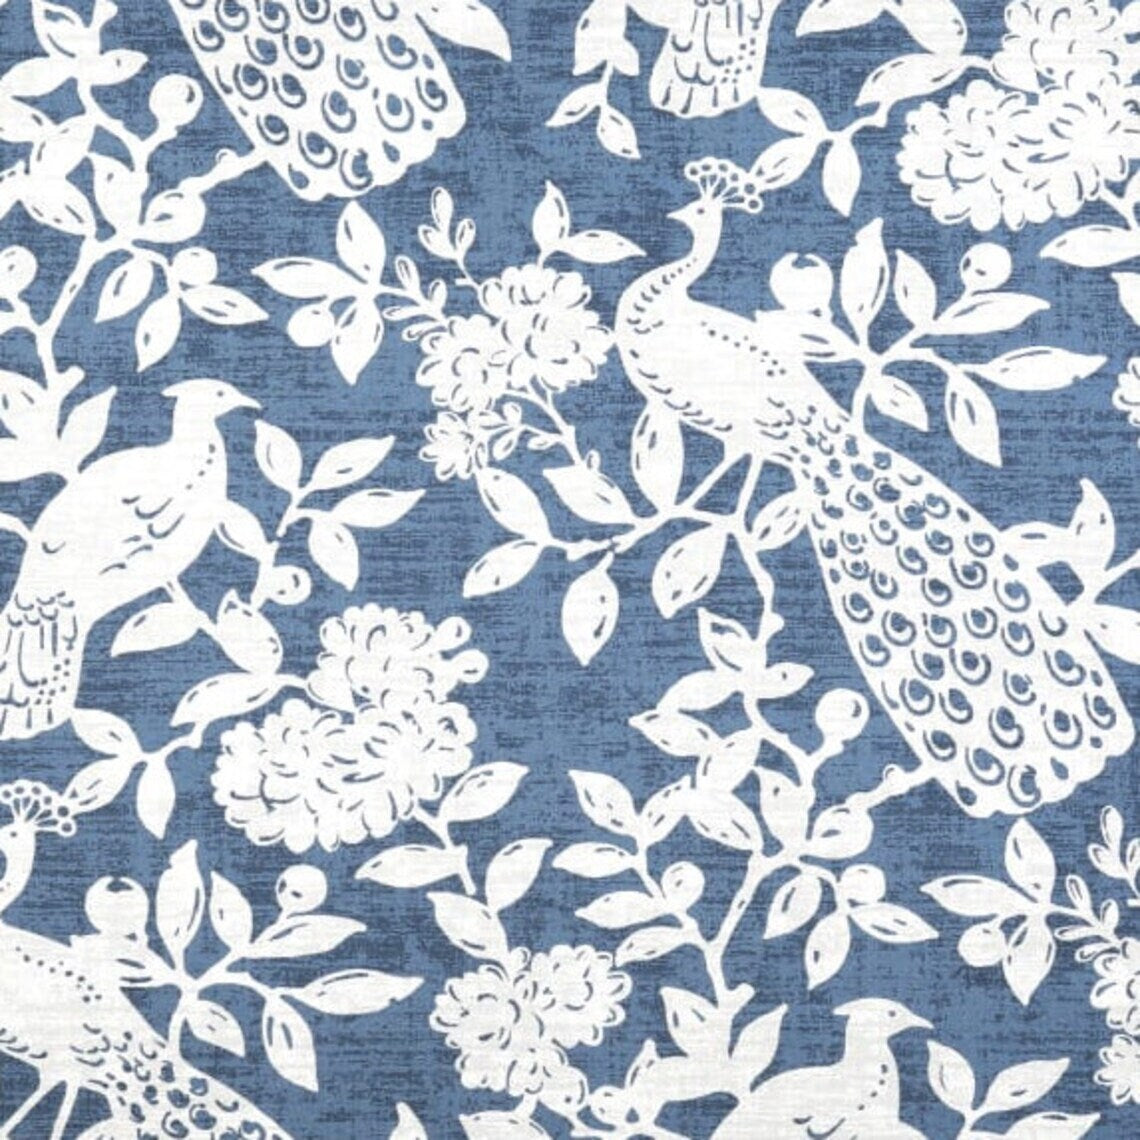 tailored crib skirt in birdsong navy blue bird toile, large scale